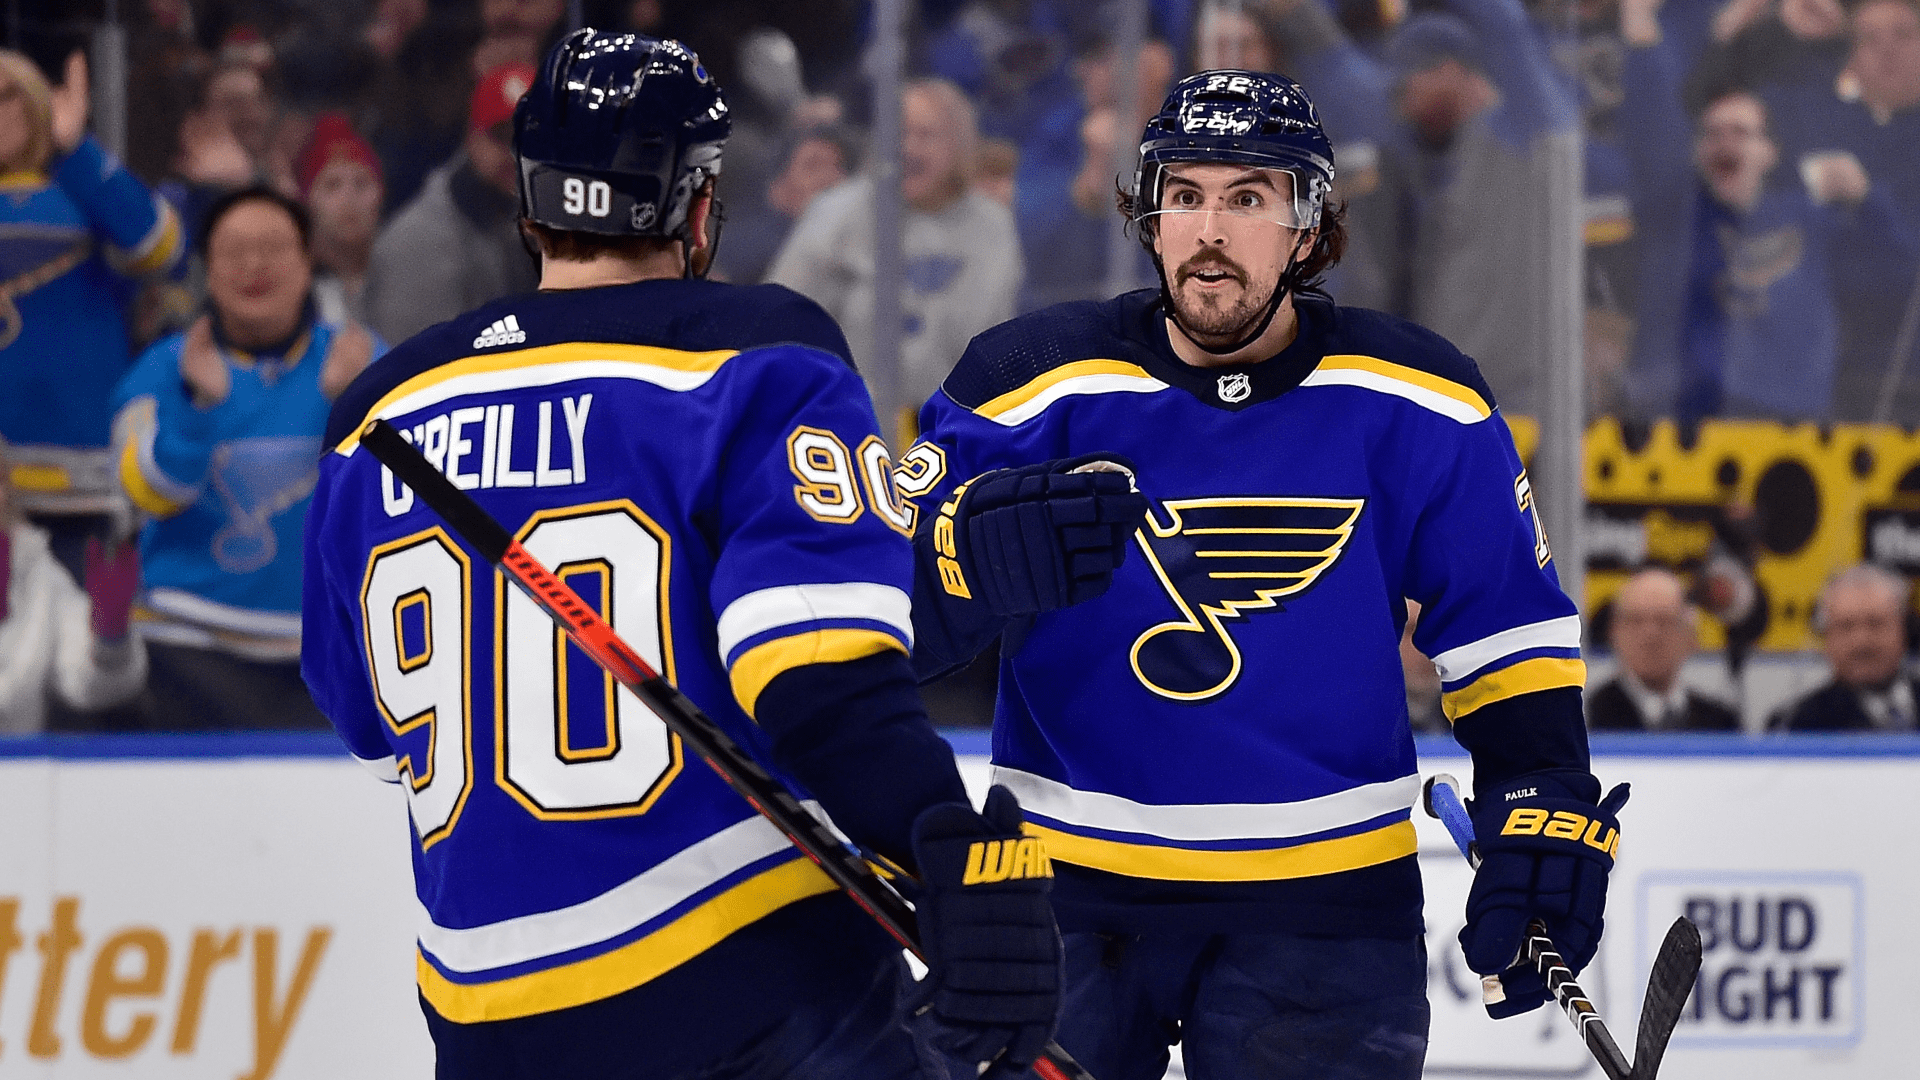 St. Louis Blues: Pros/Cons From St. Louis All-Star Game